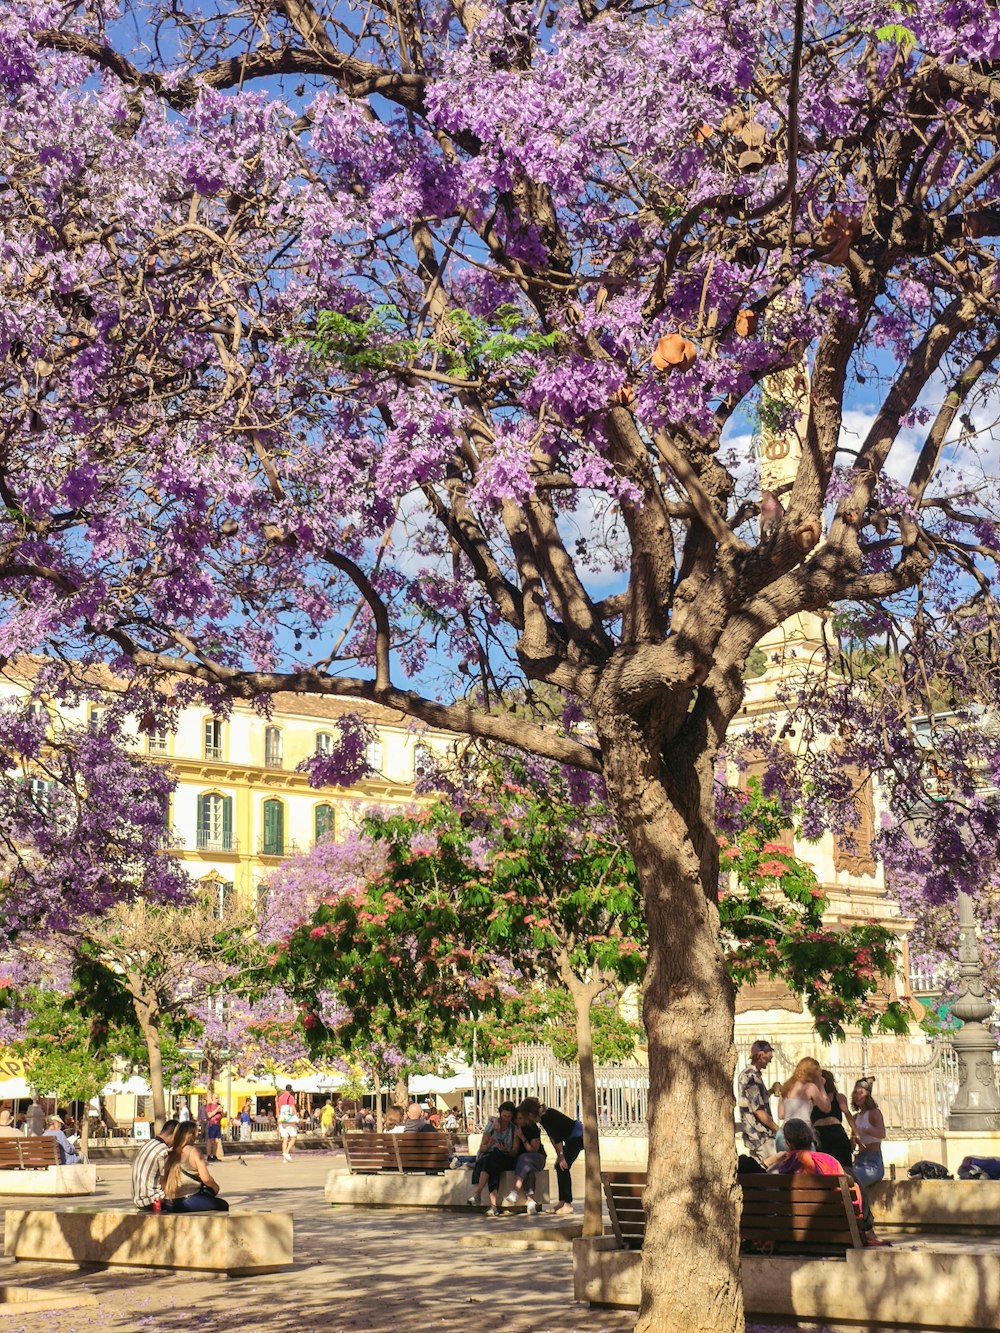 a tree with purple flowers in a plaza